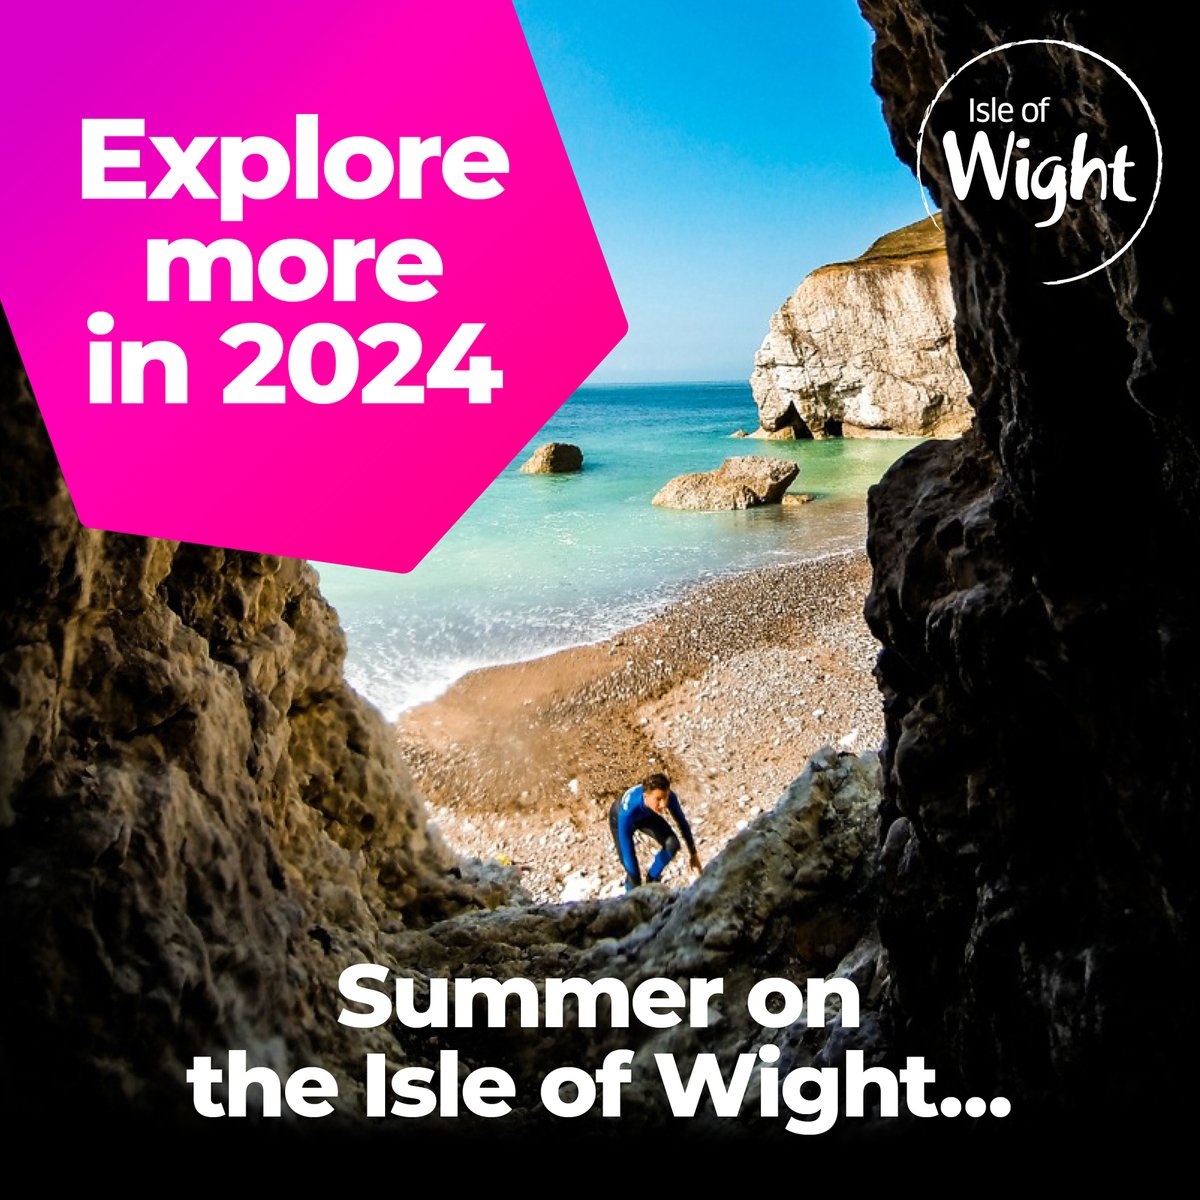 🌴 Your summer adventure awaits! Say Yes to the Isle of Wight and make memories that last forever.🏖☀️🐚

ℹ️ Click here for inspiration: bit.ly/SummerIW

#IOW #IsleofWight #LoveGreatBritain #UNESCO #AONB #IsleofWightNationalLandscape #IsleofWightNL #Coast2024